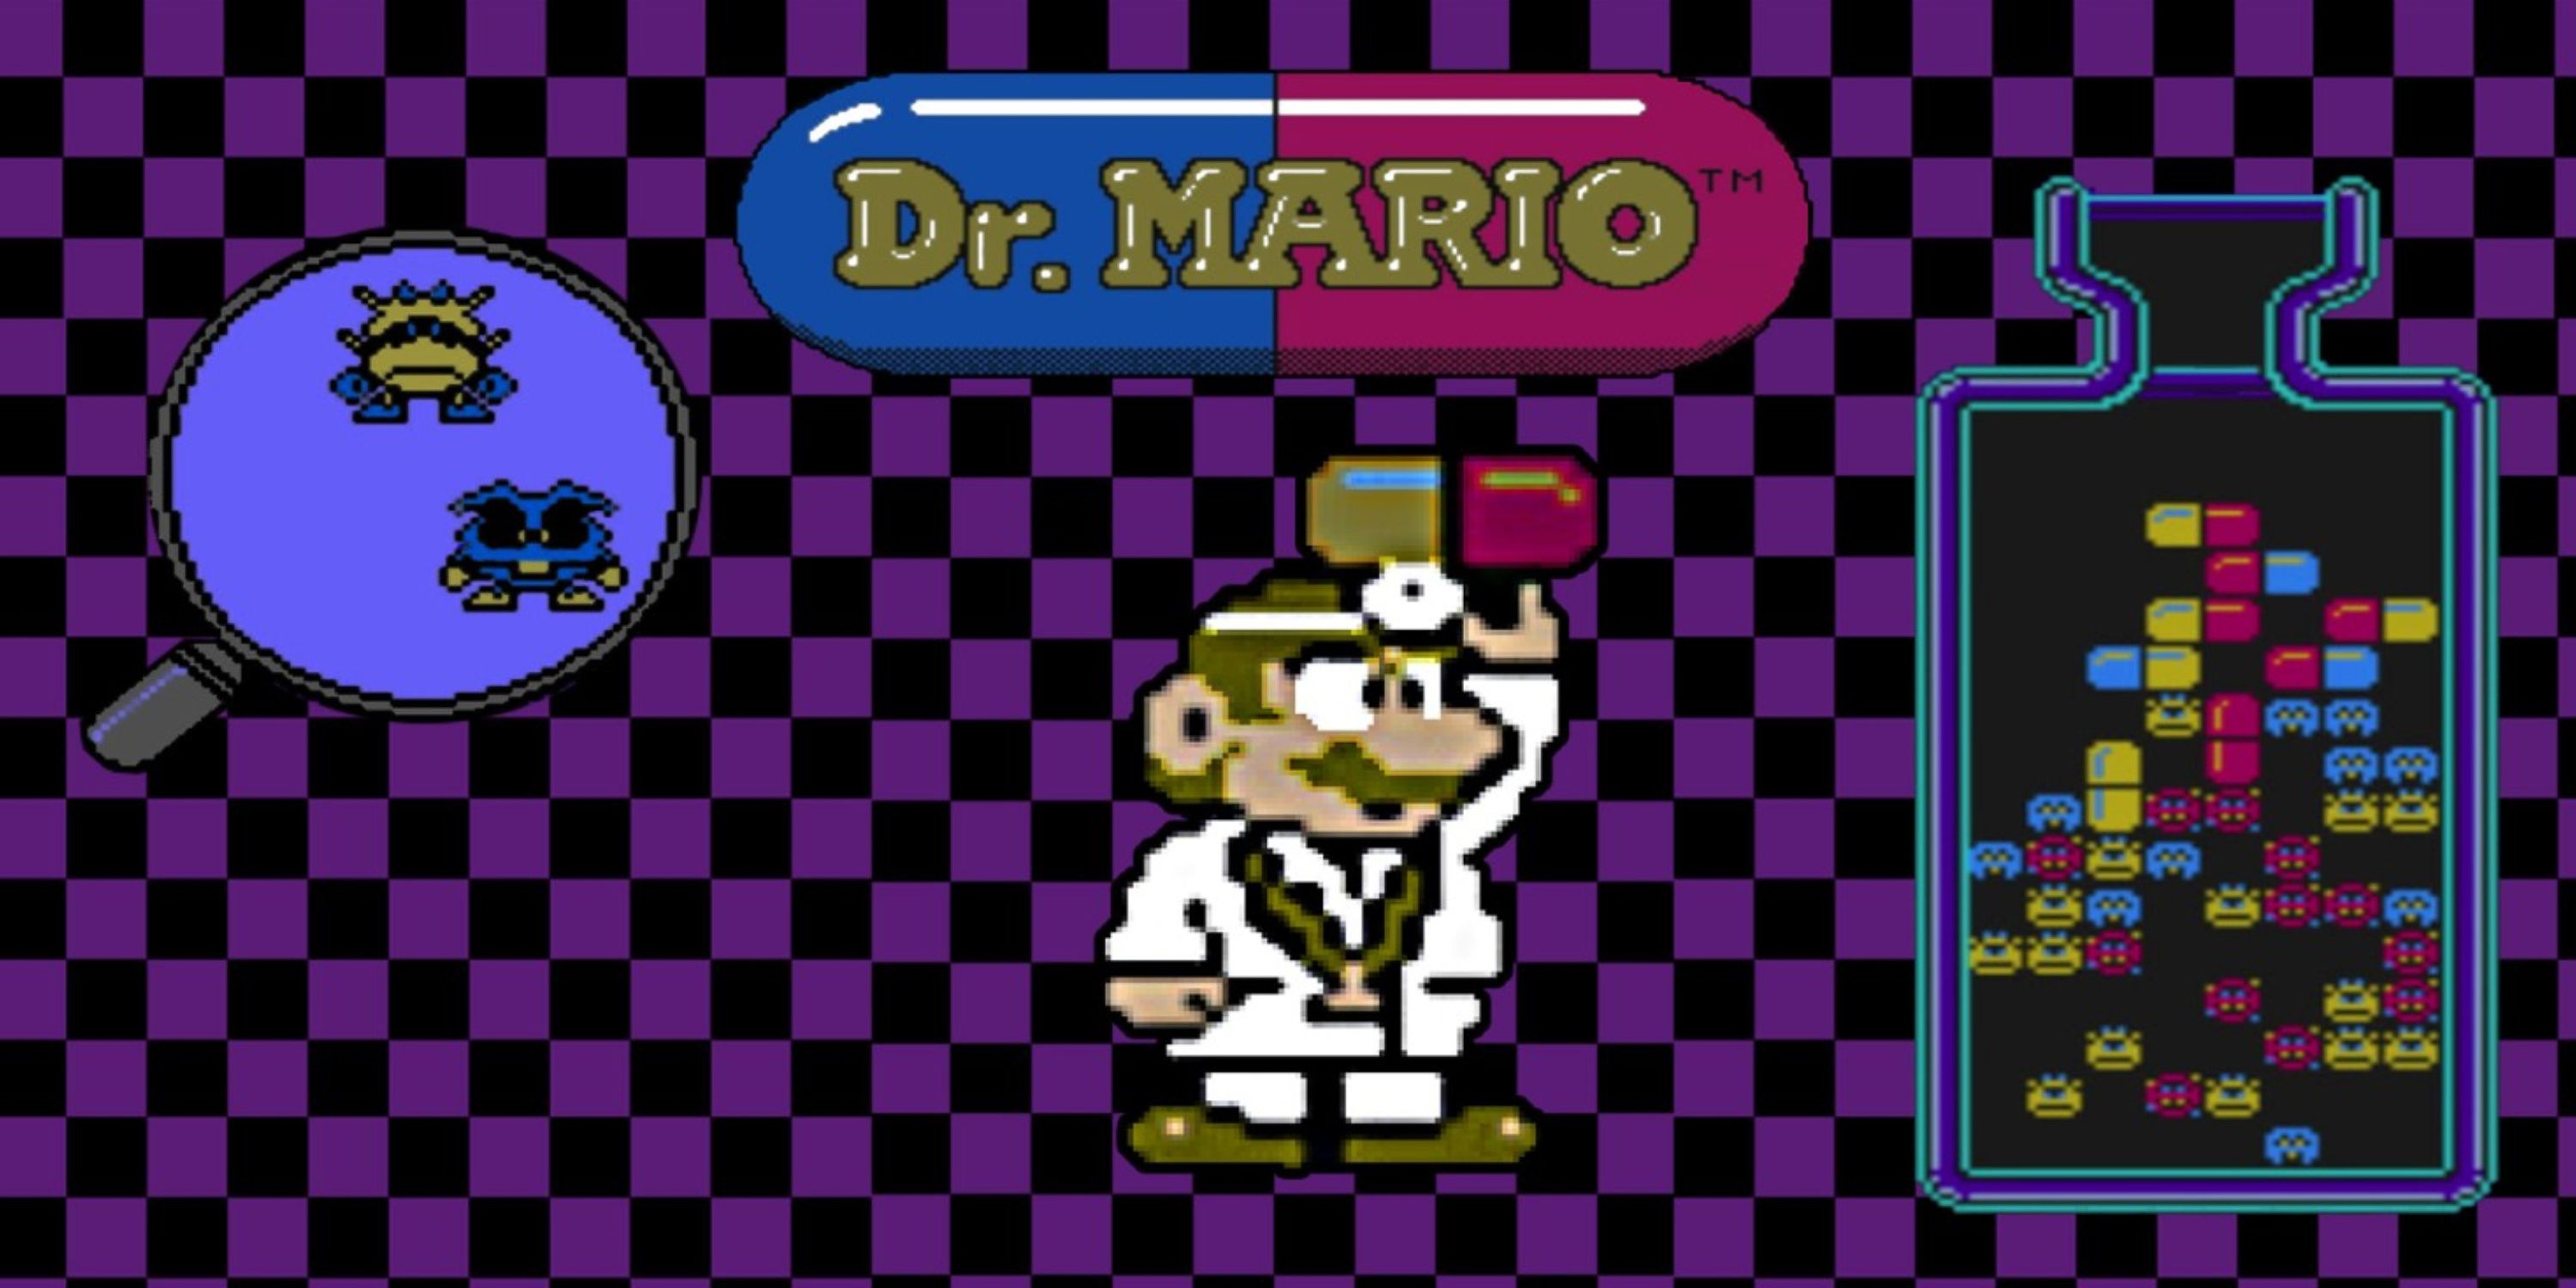 Original Dr.Mario with pill bottle shaped level and viruses under a microscope